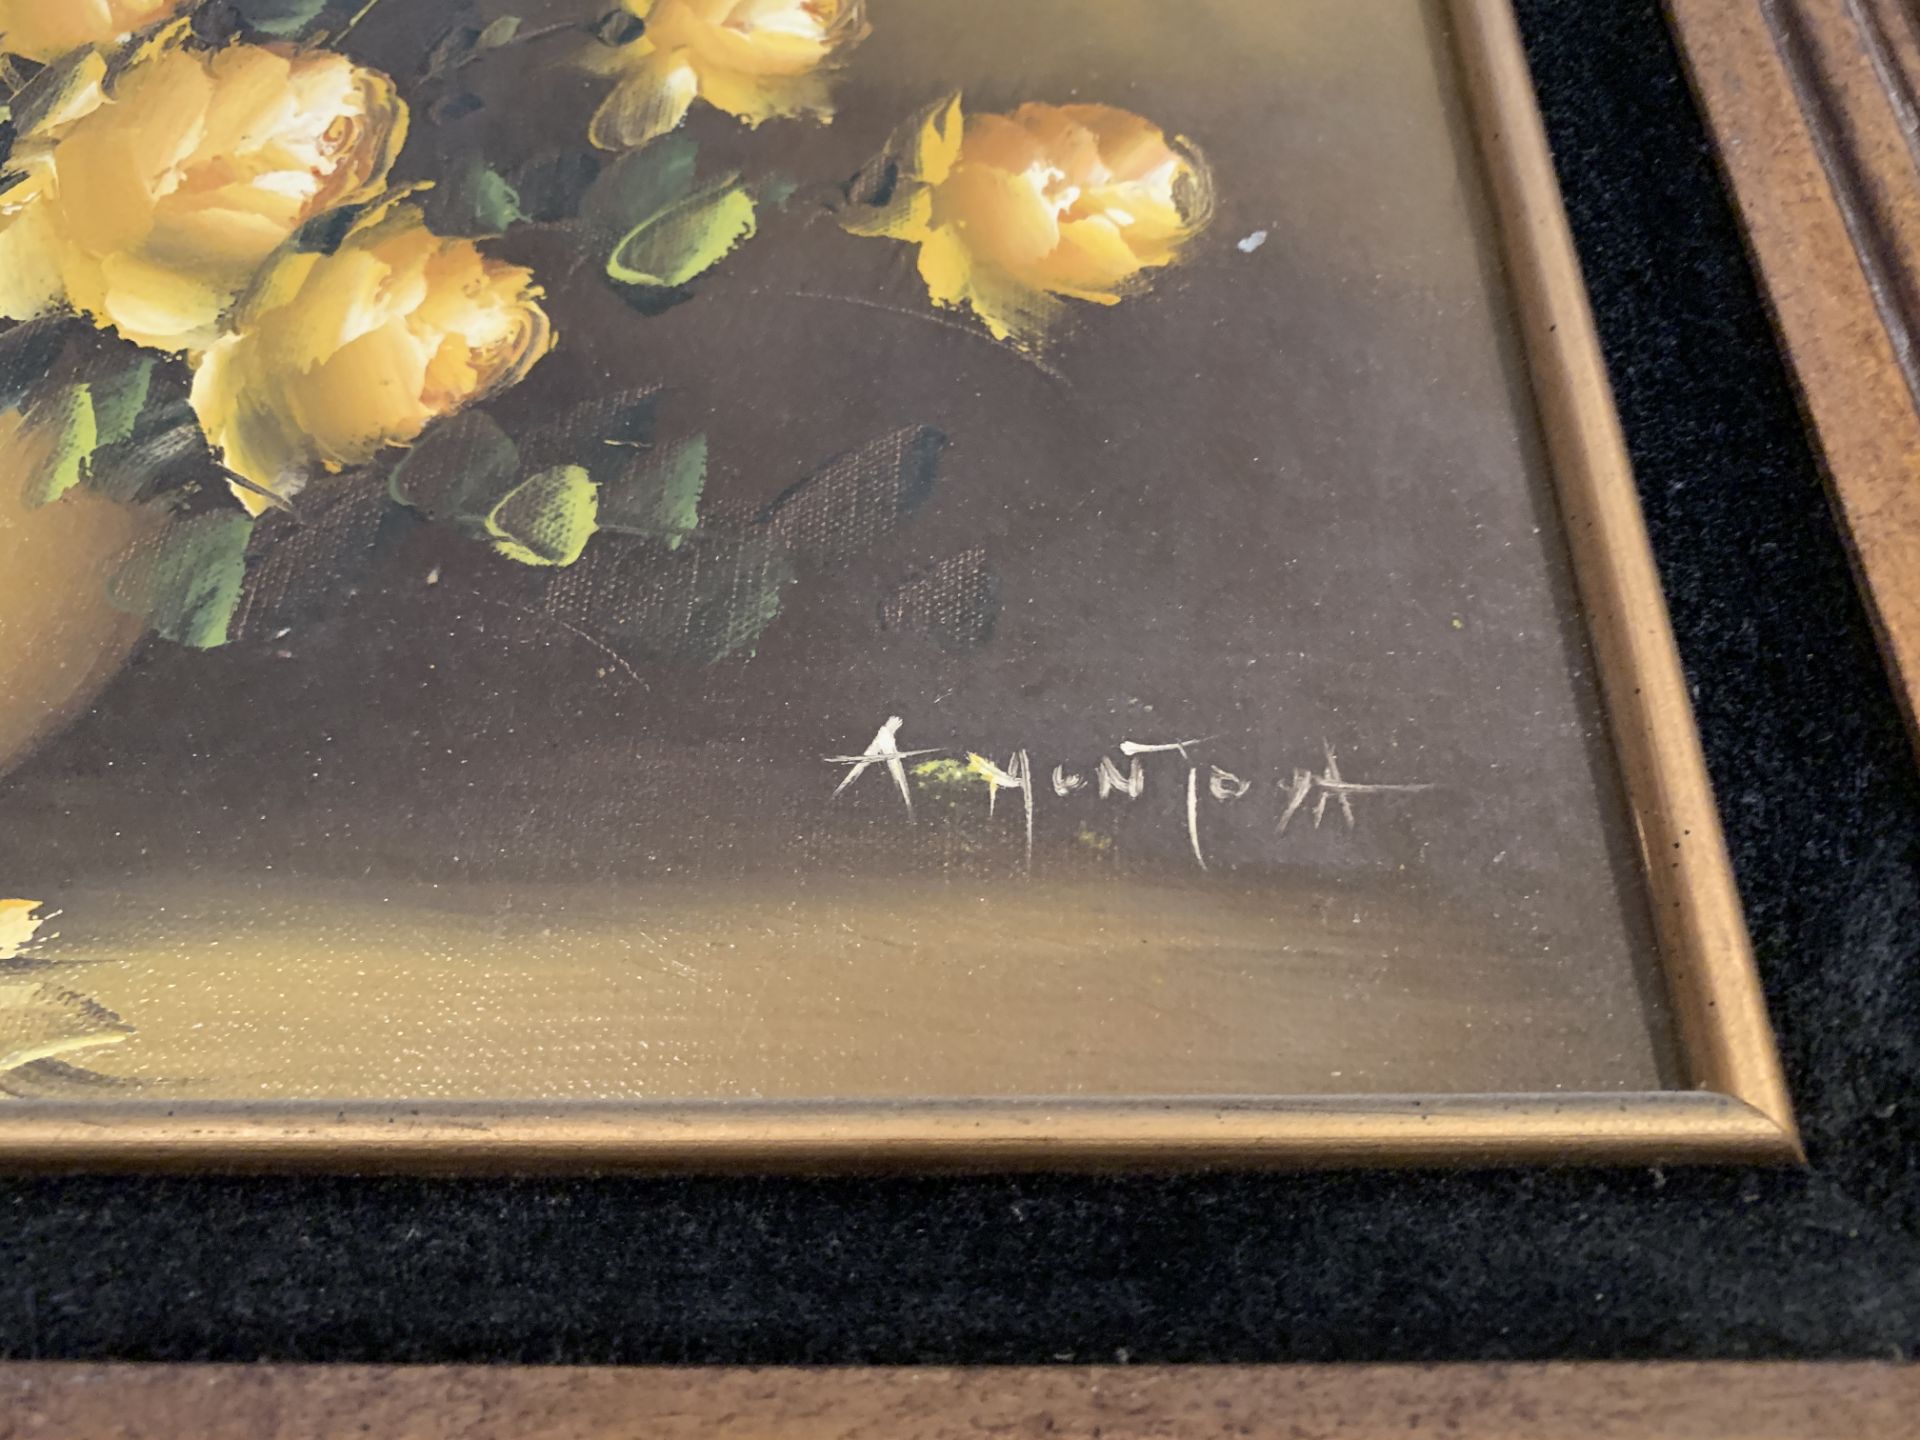 THICK FRAMED FLORAL ART PIECE, YELLOW FLOWERS IN VASE. DIMENSIONS: 28X31.5" - Image 3 of 3